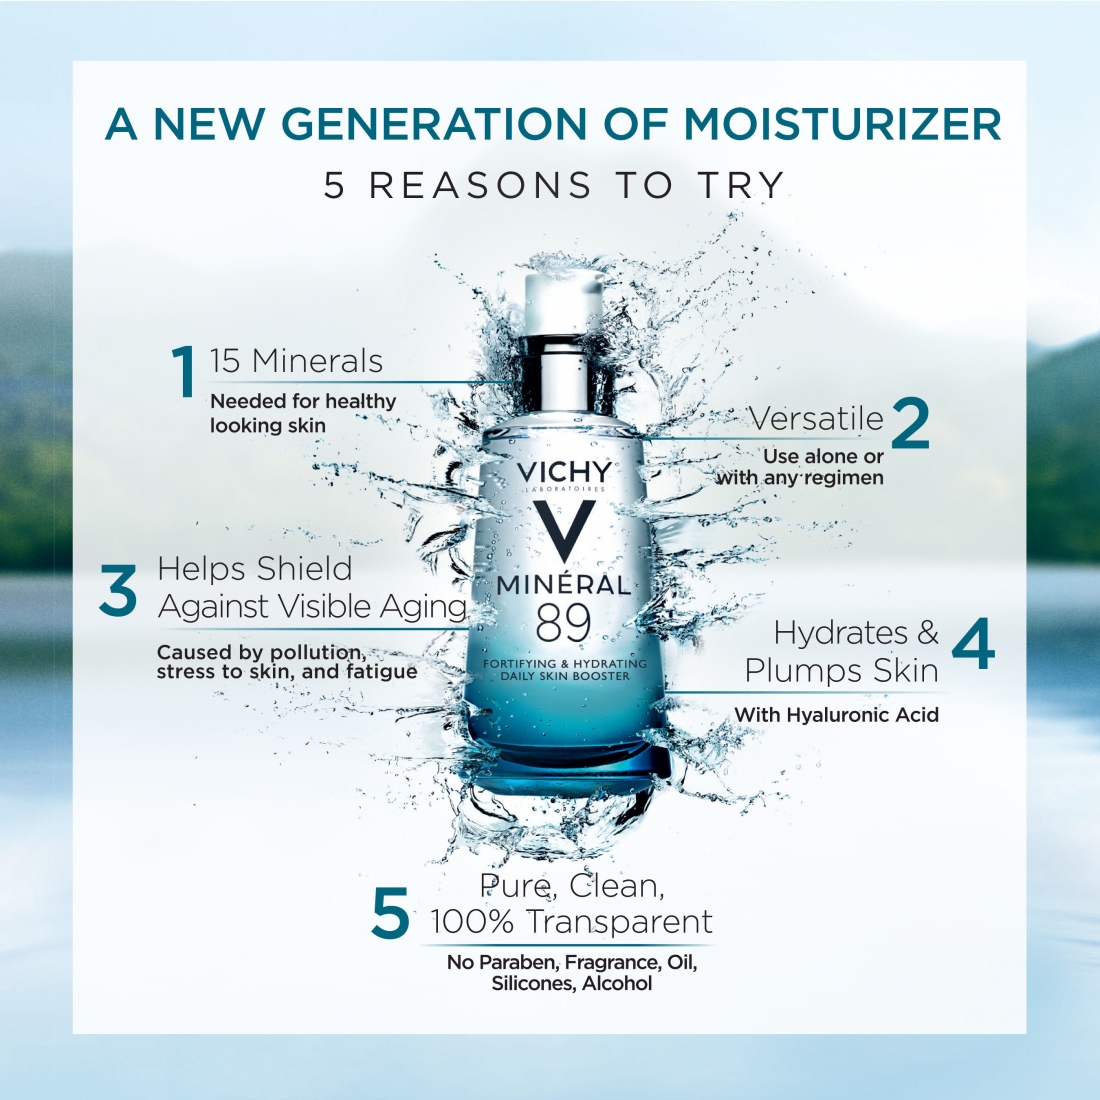 Vichy Mineral 89 Hydrating & Strengthening Daily Skin Booster